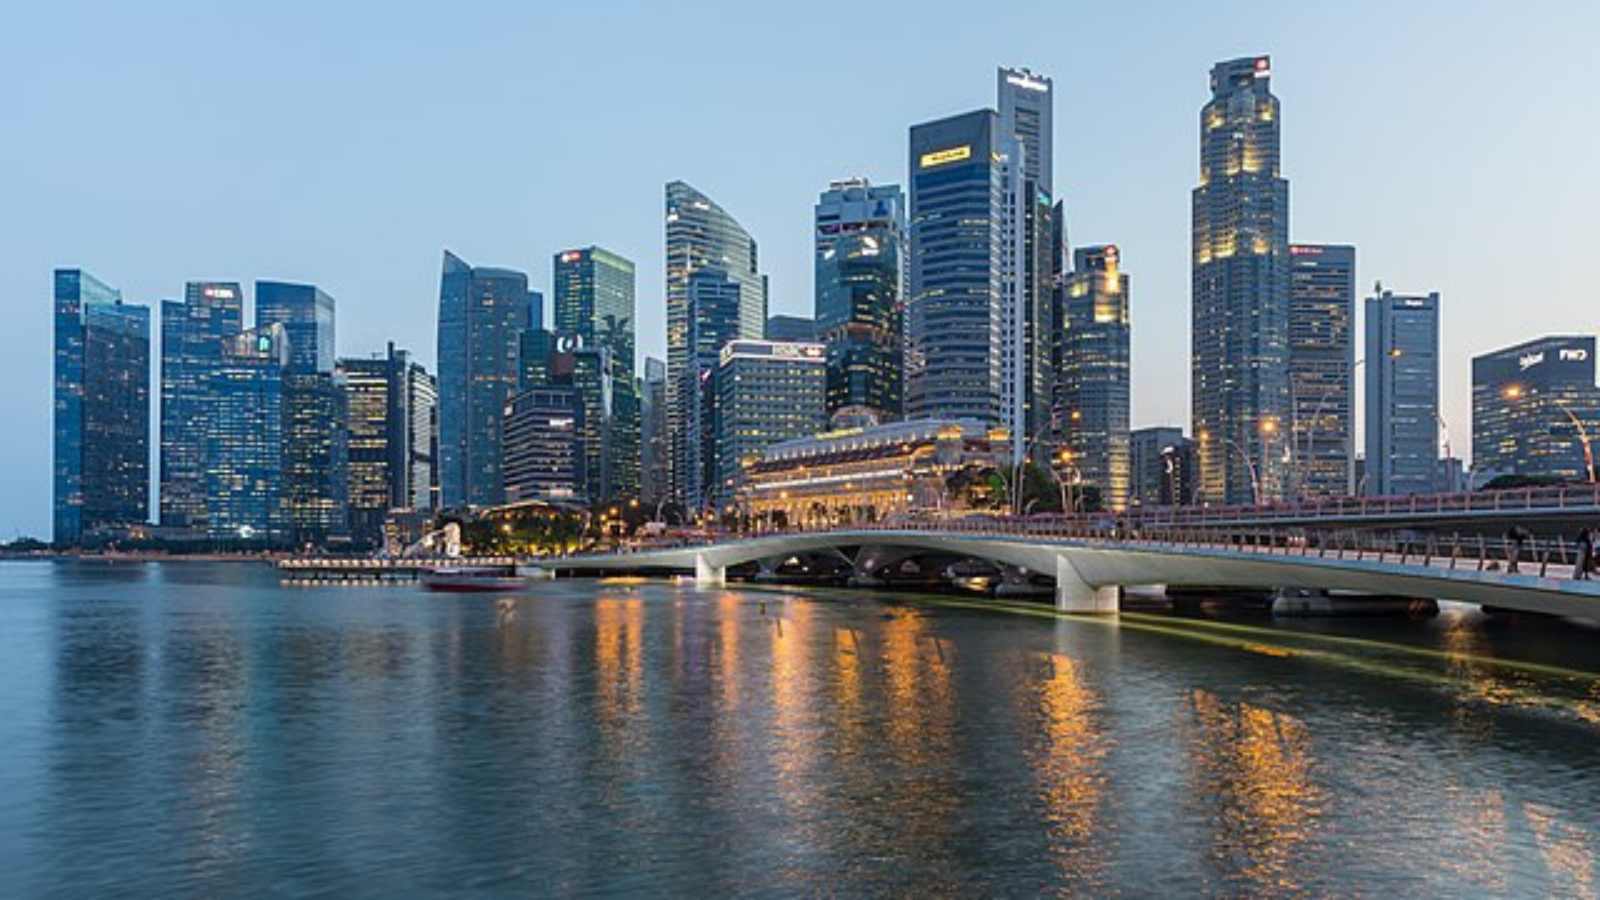 <p>Singapore, sometimes called a "melting pot of cultures," is the ideal destination for lone travelers to fully immerse themselves.</p> <p>Eat to your heart's content at Hawker Food Centers, such as Newton Food Centre and Maxwell Road; don't forget to check out the famous Marina Bay Sands Hotel and Gardens by the Bay.</p>